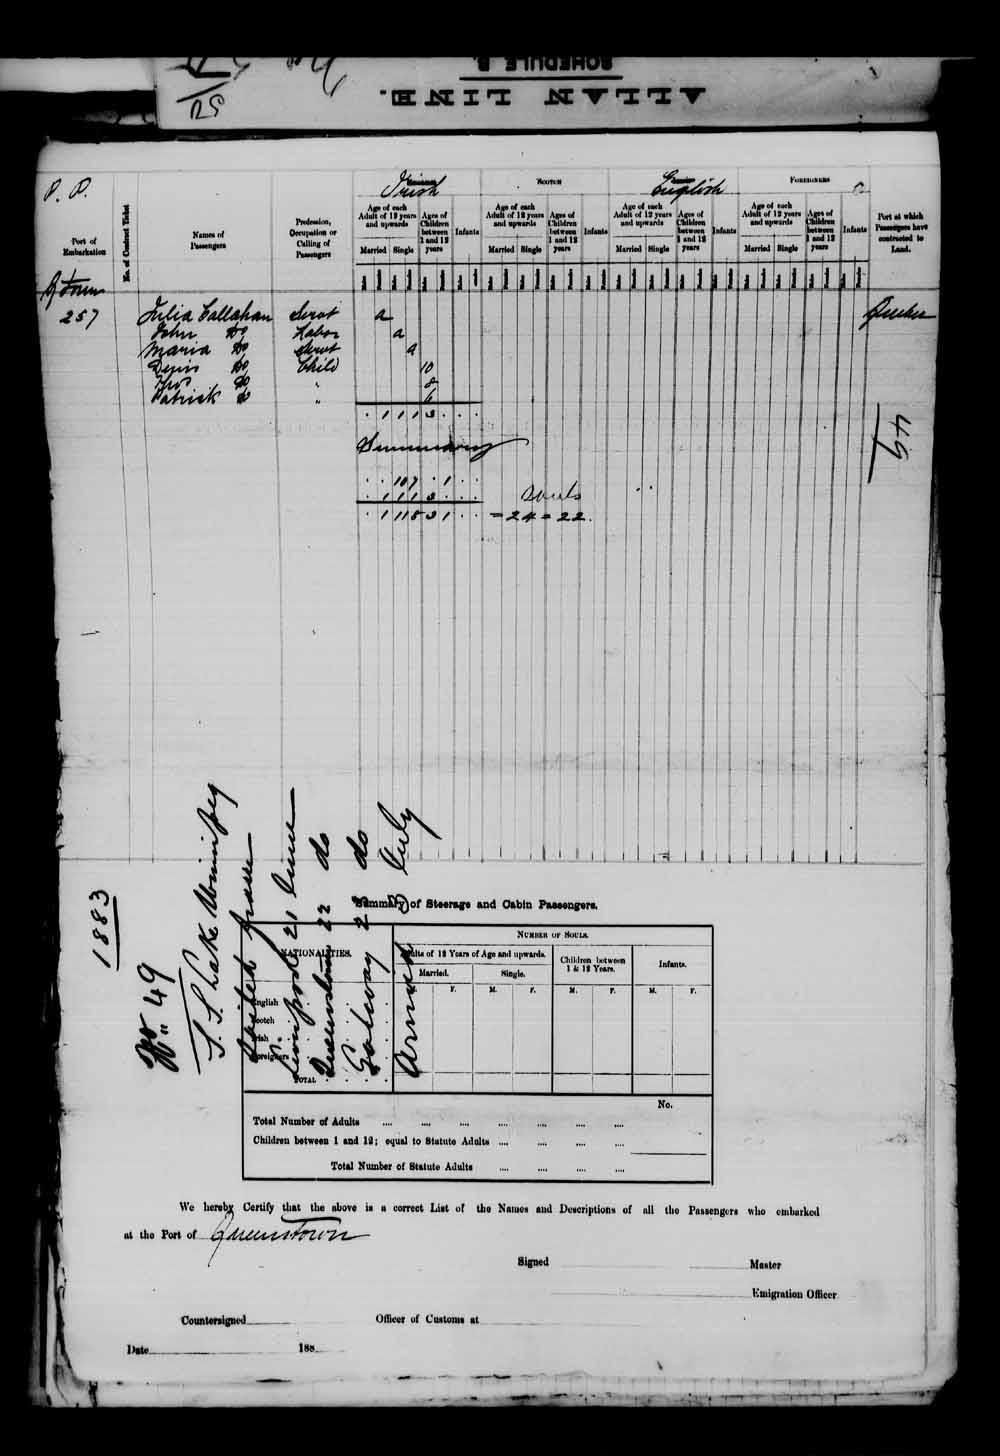 Digitized page of Passenger Lists for Image No.: e003543414